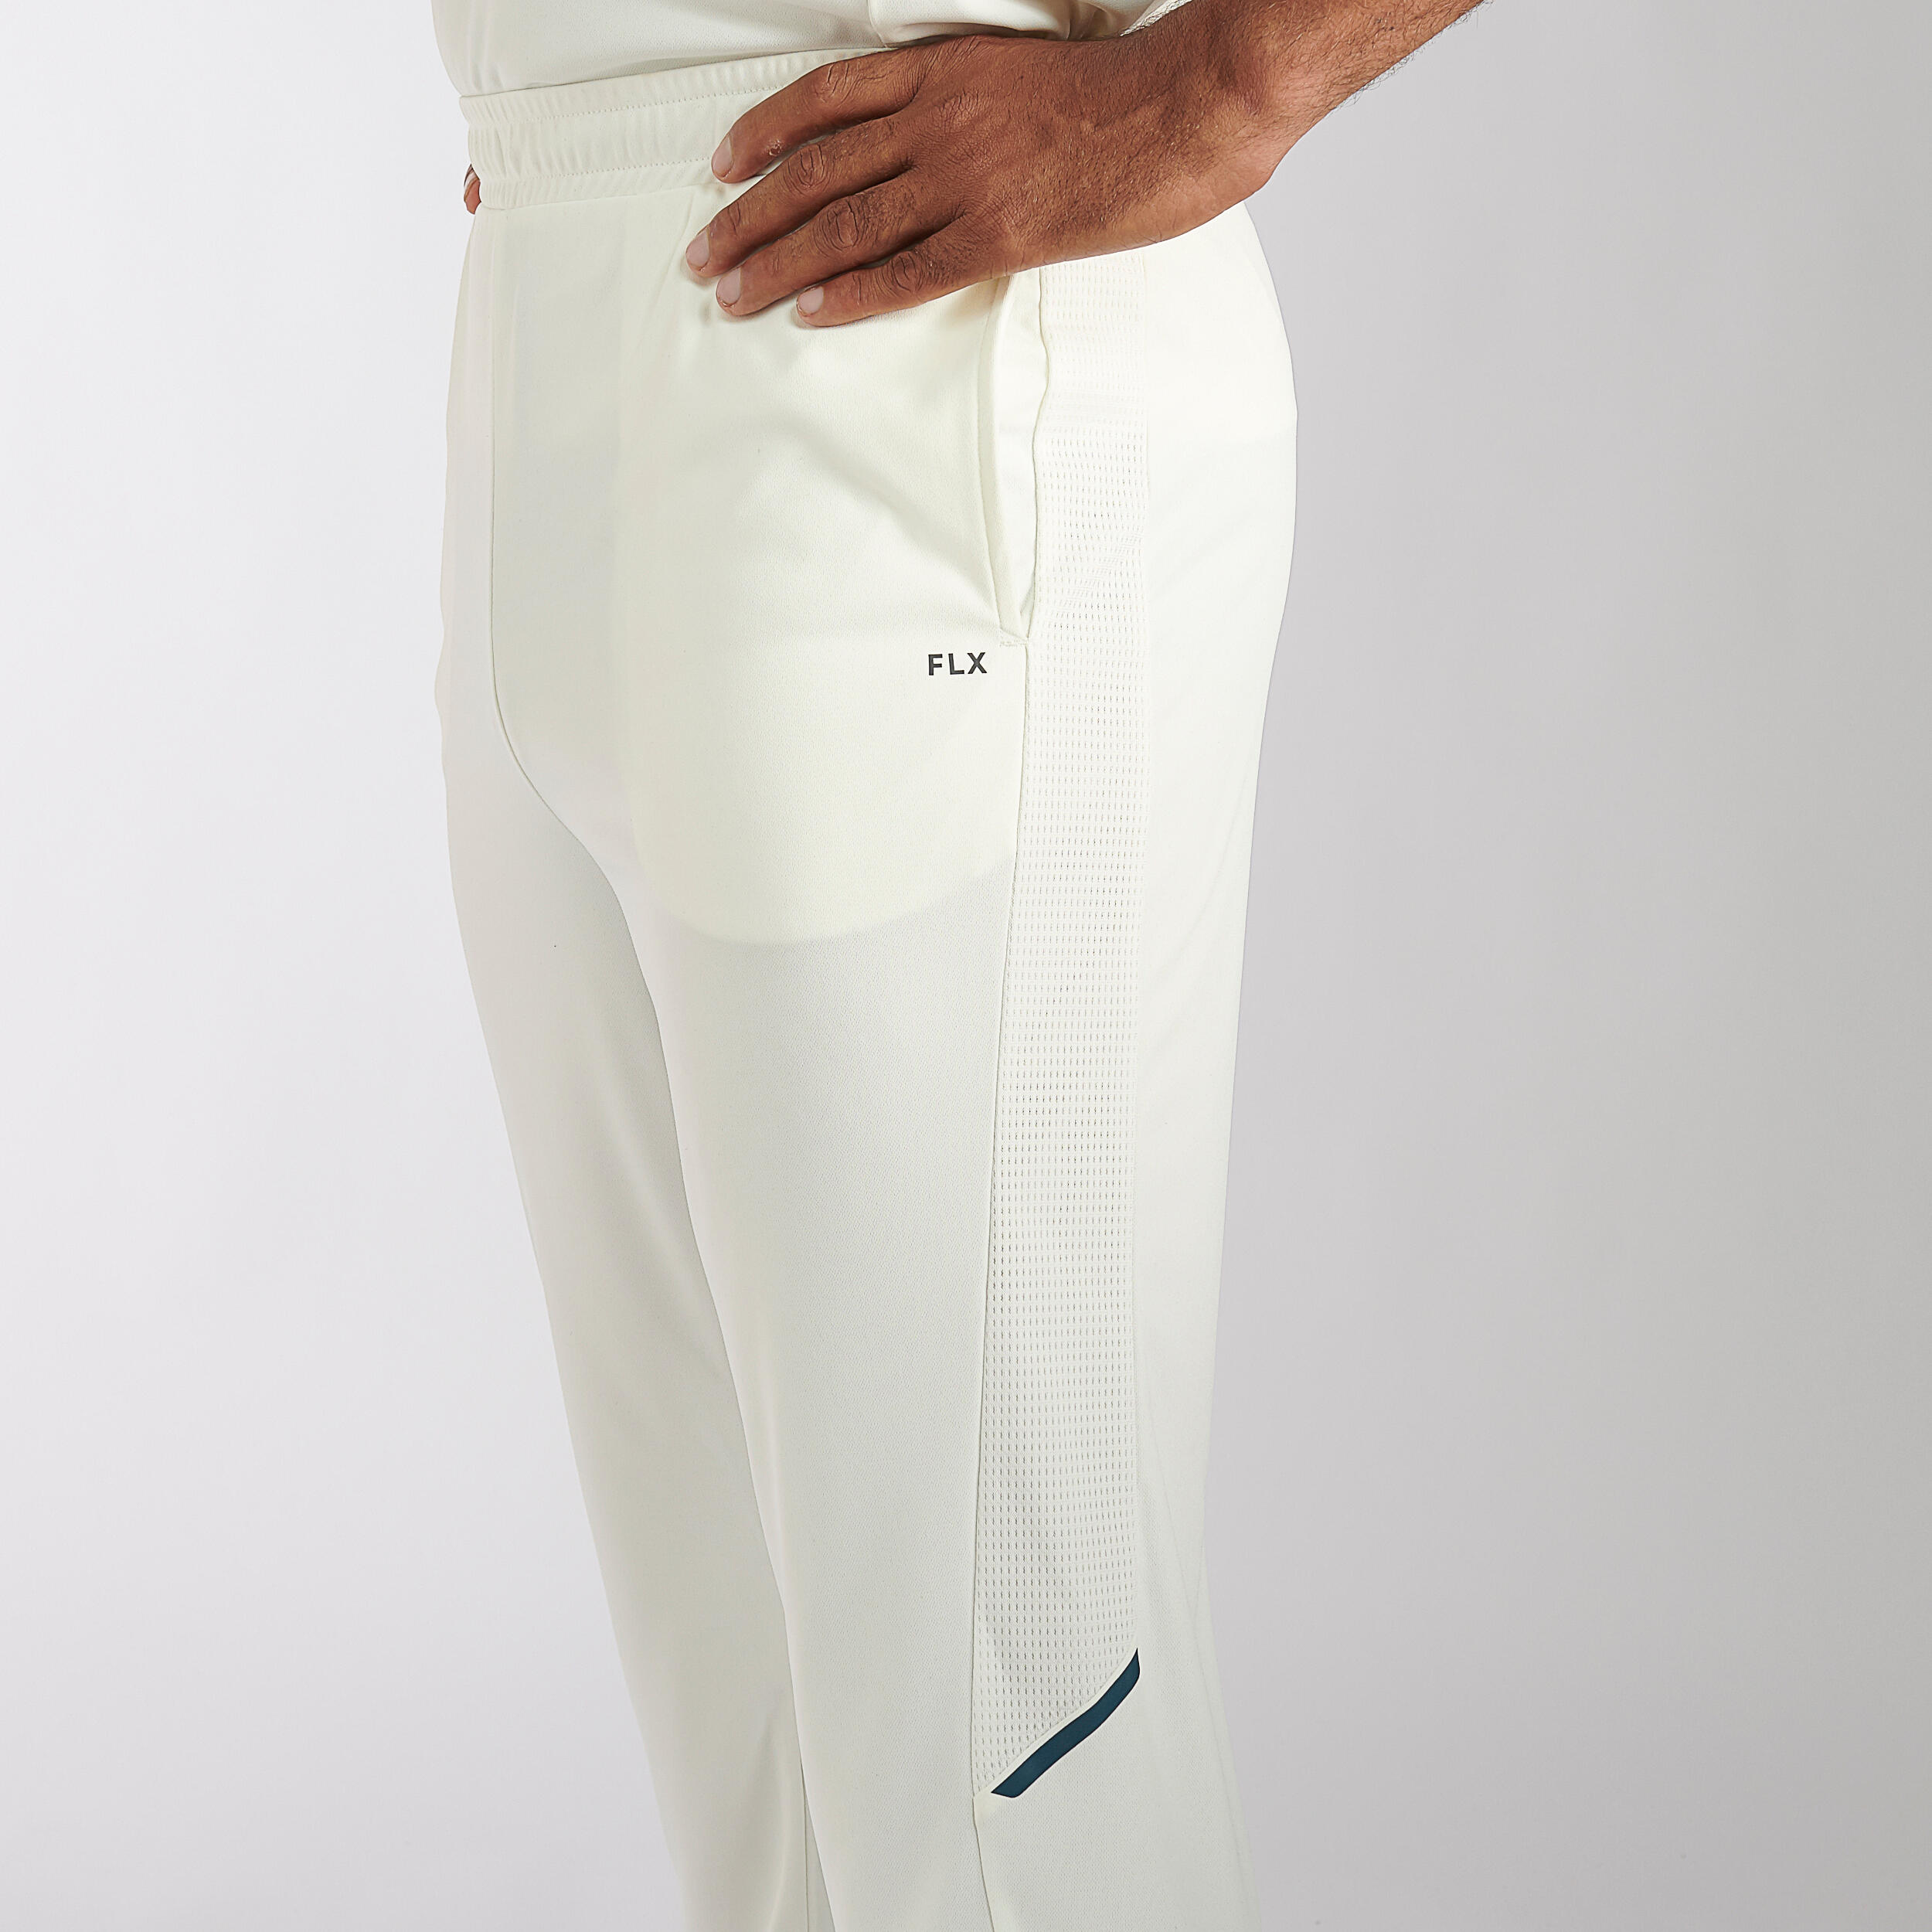 Decathlon  Trackpant  Lower  FLX  MENS CRICKET STRAIGHT FIT TROUSER  CTS 500 GREY  YouTube